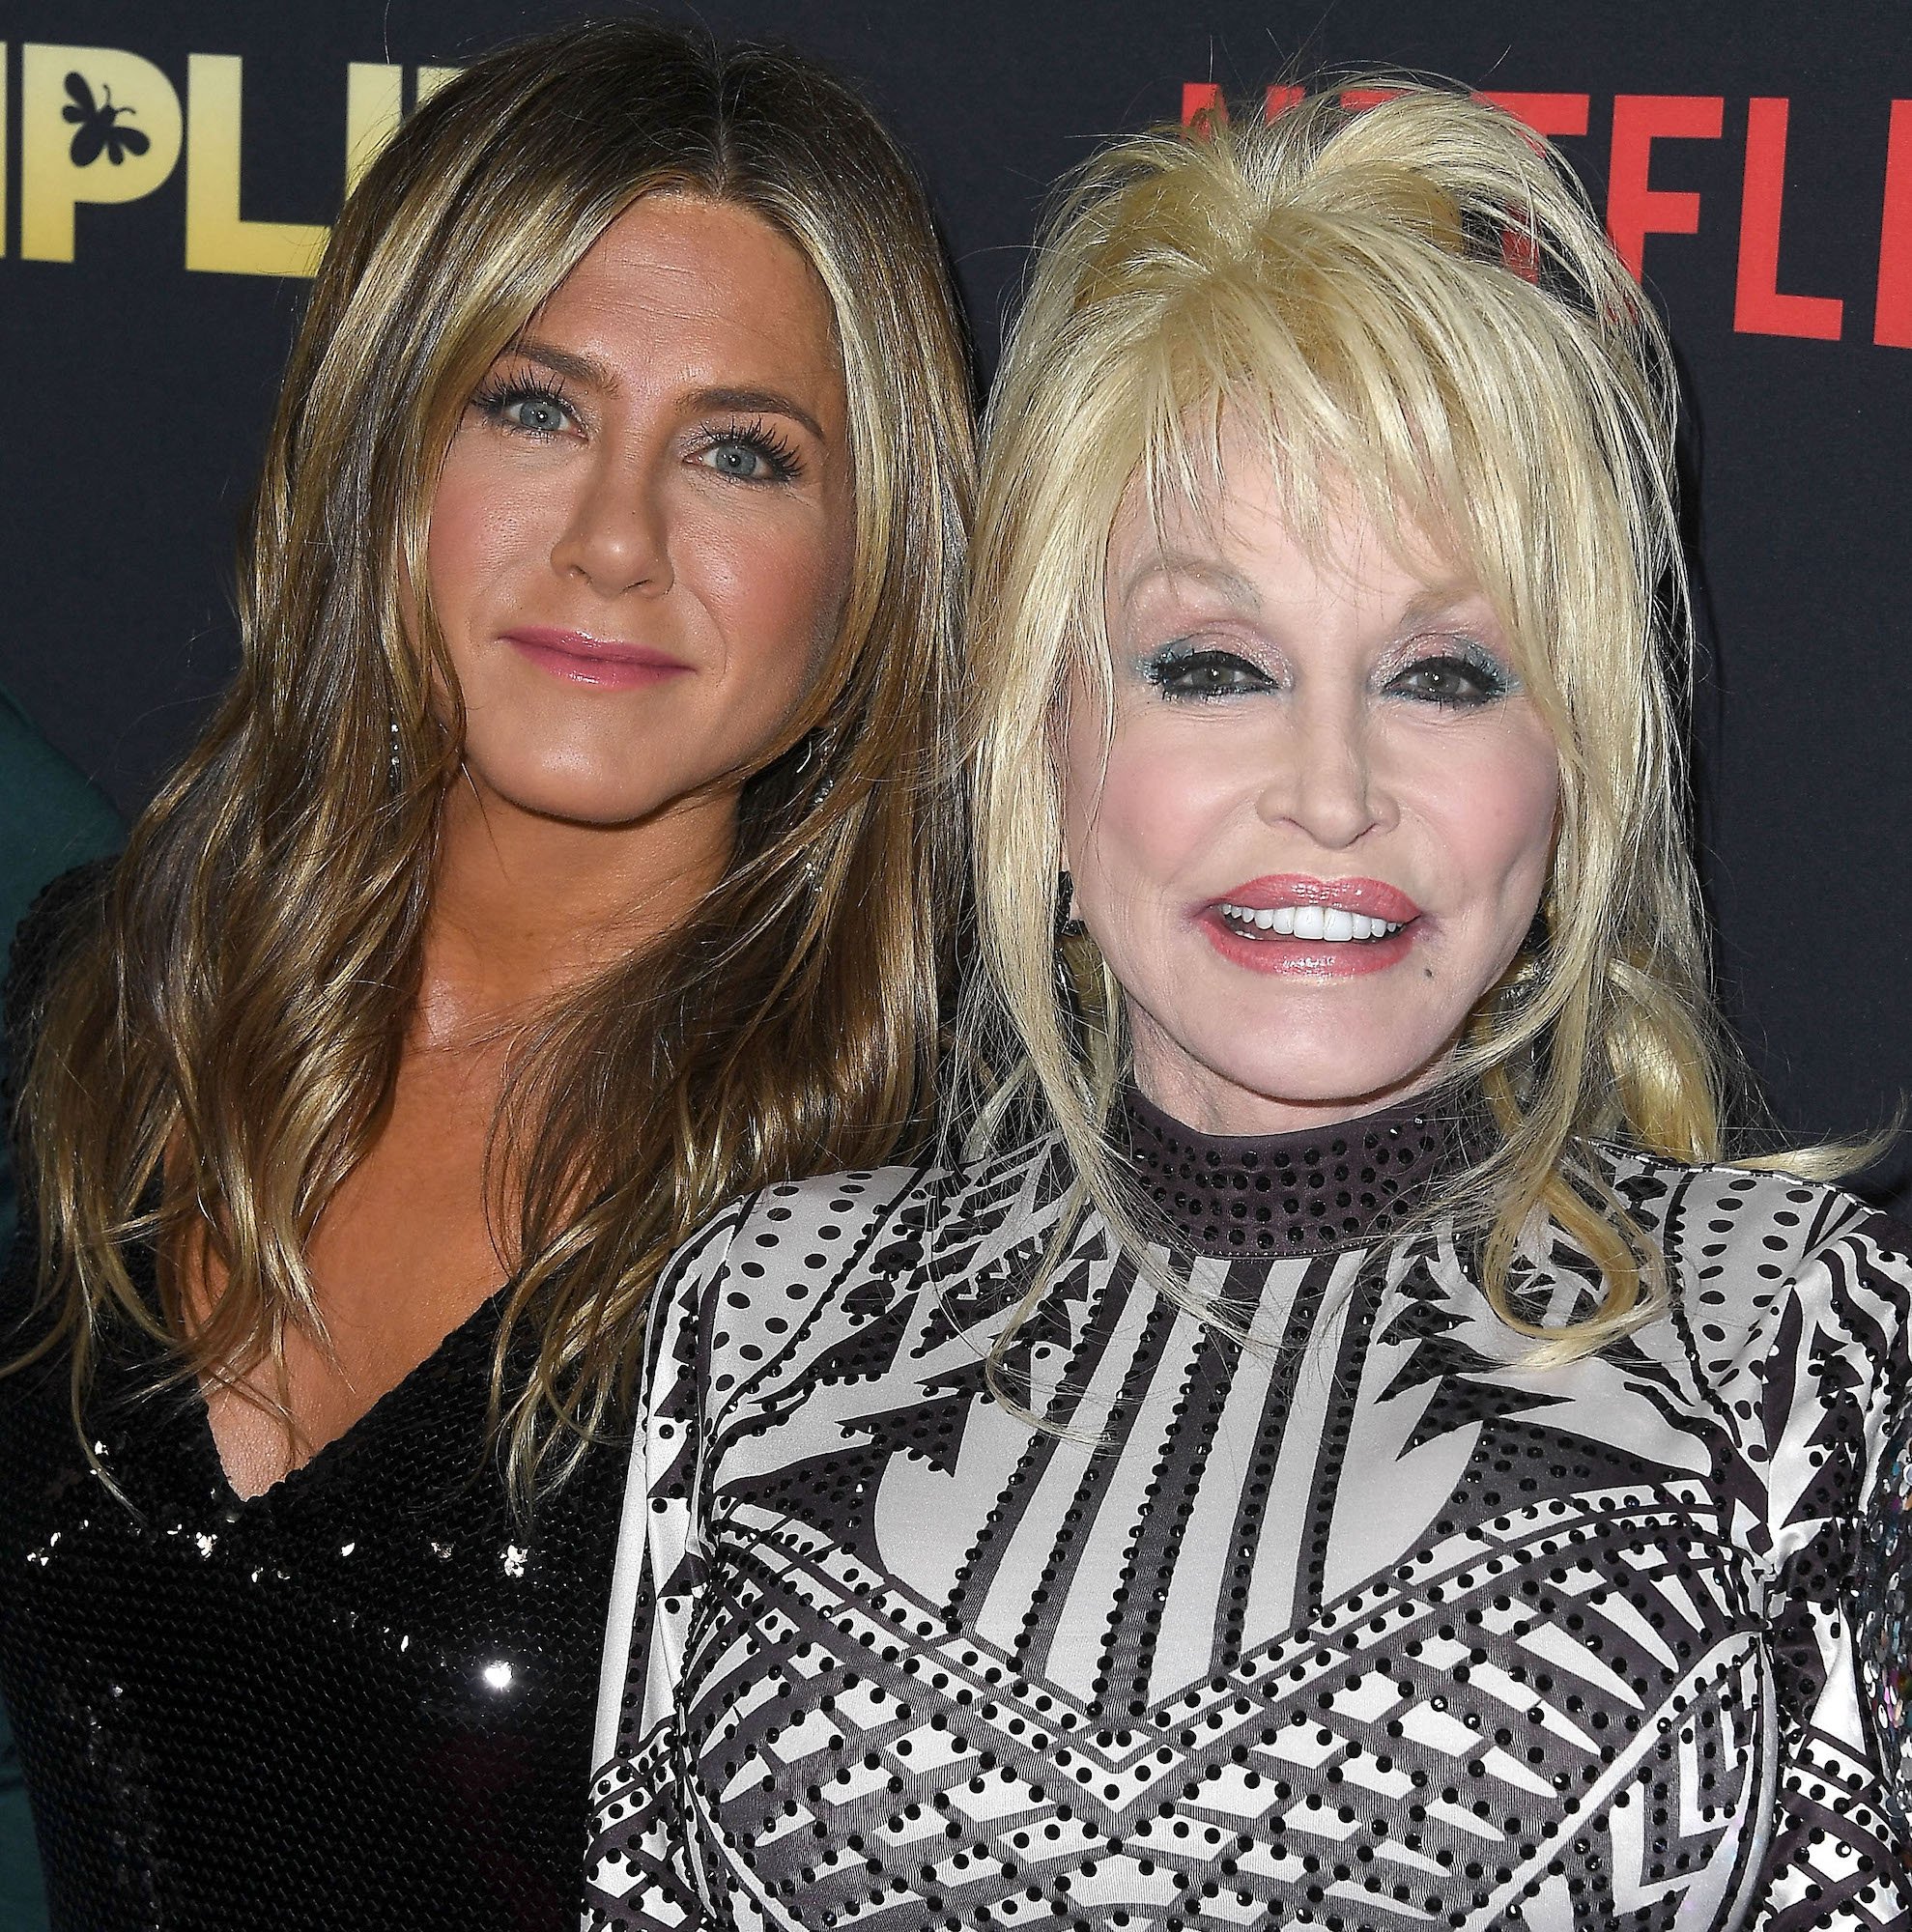 Jennifer Aniston and Dolly Parton attending at the premiere Of Netflix's "Dumplin'" in 2018